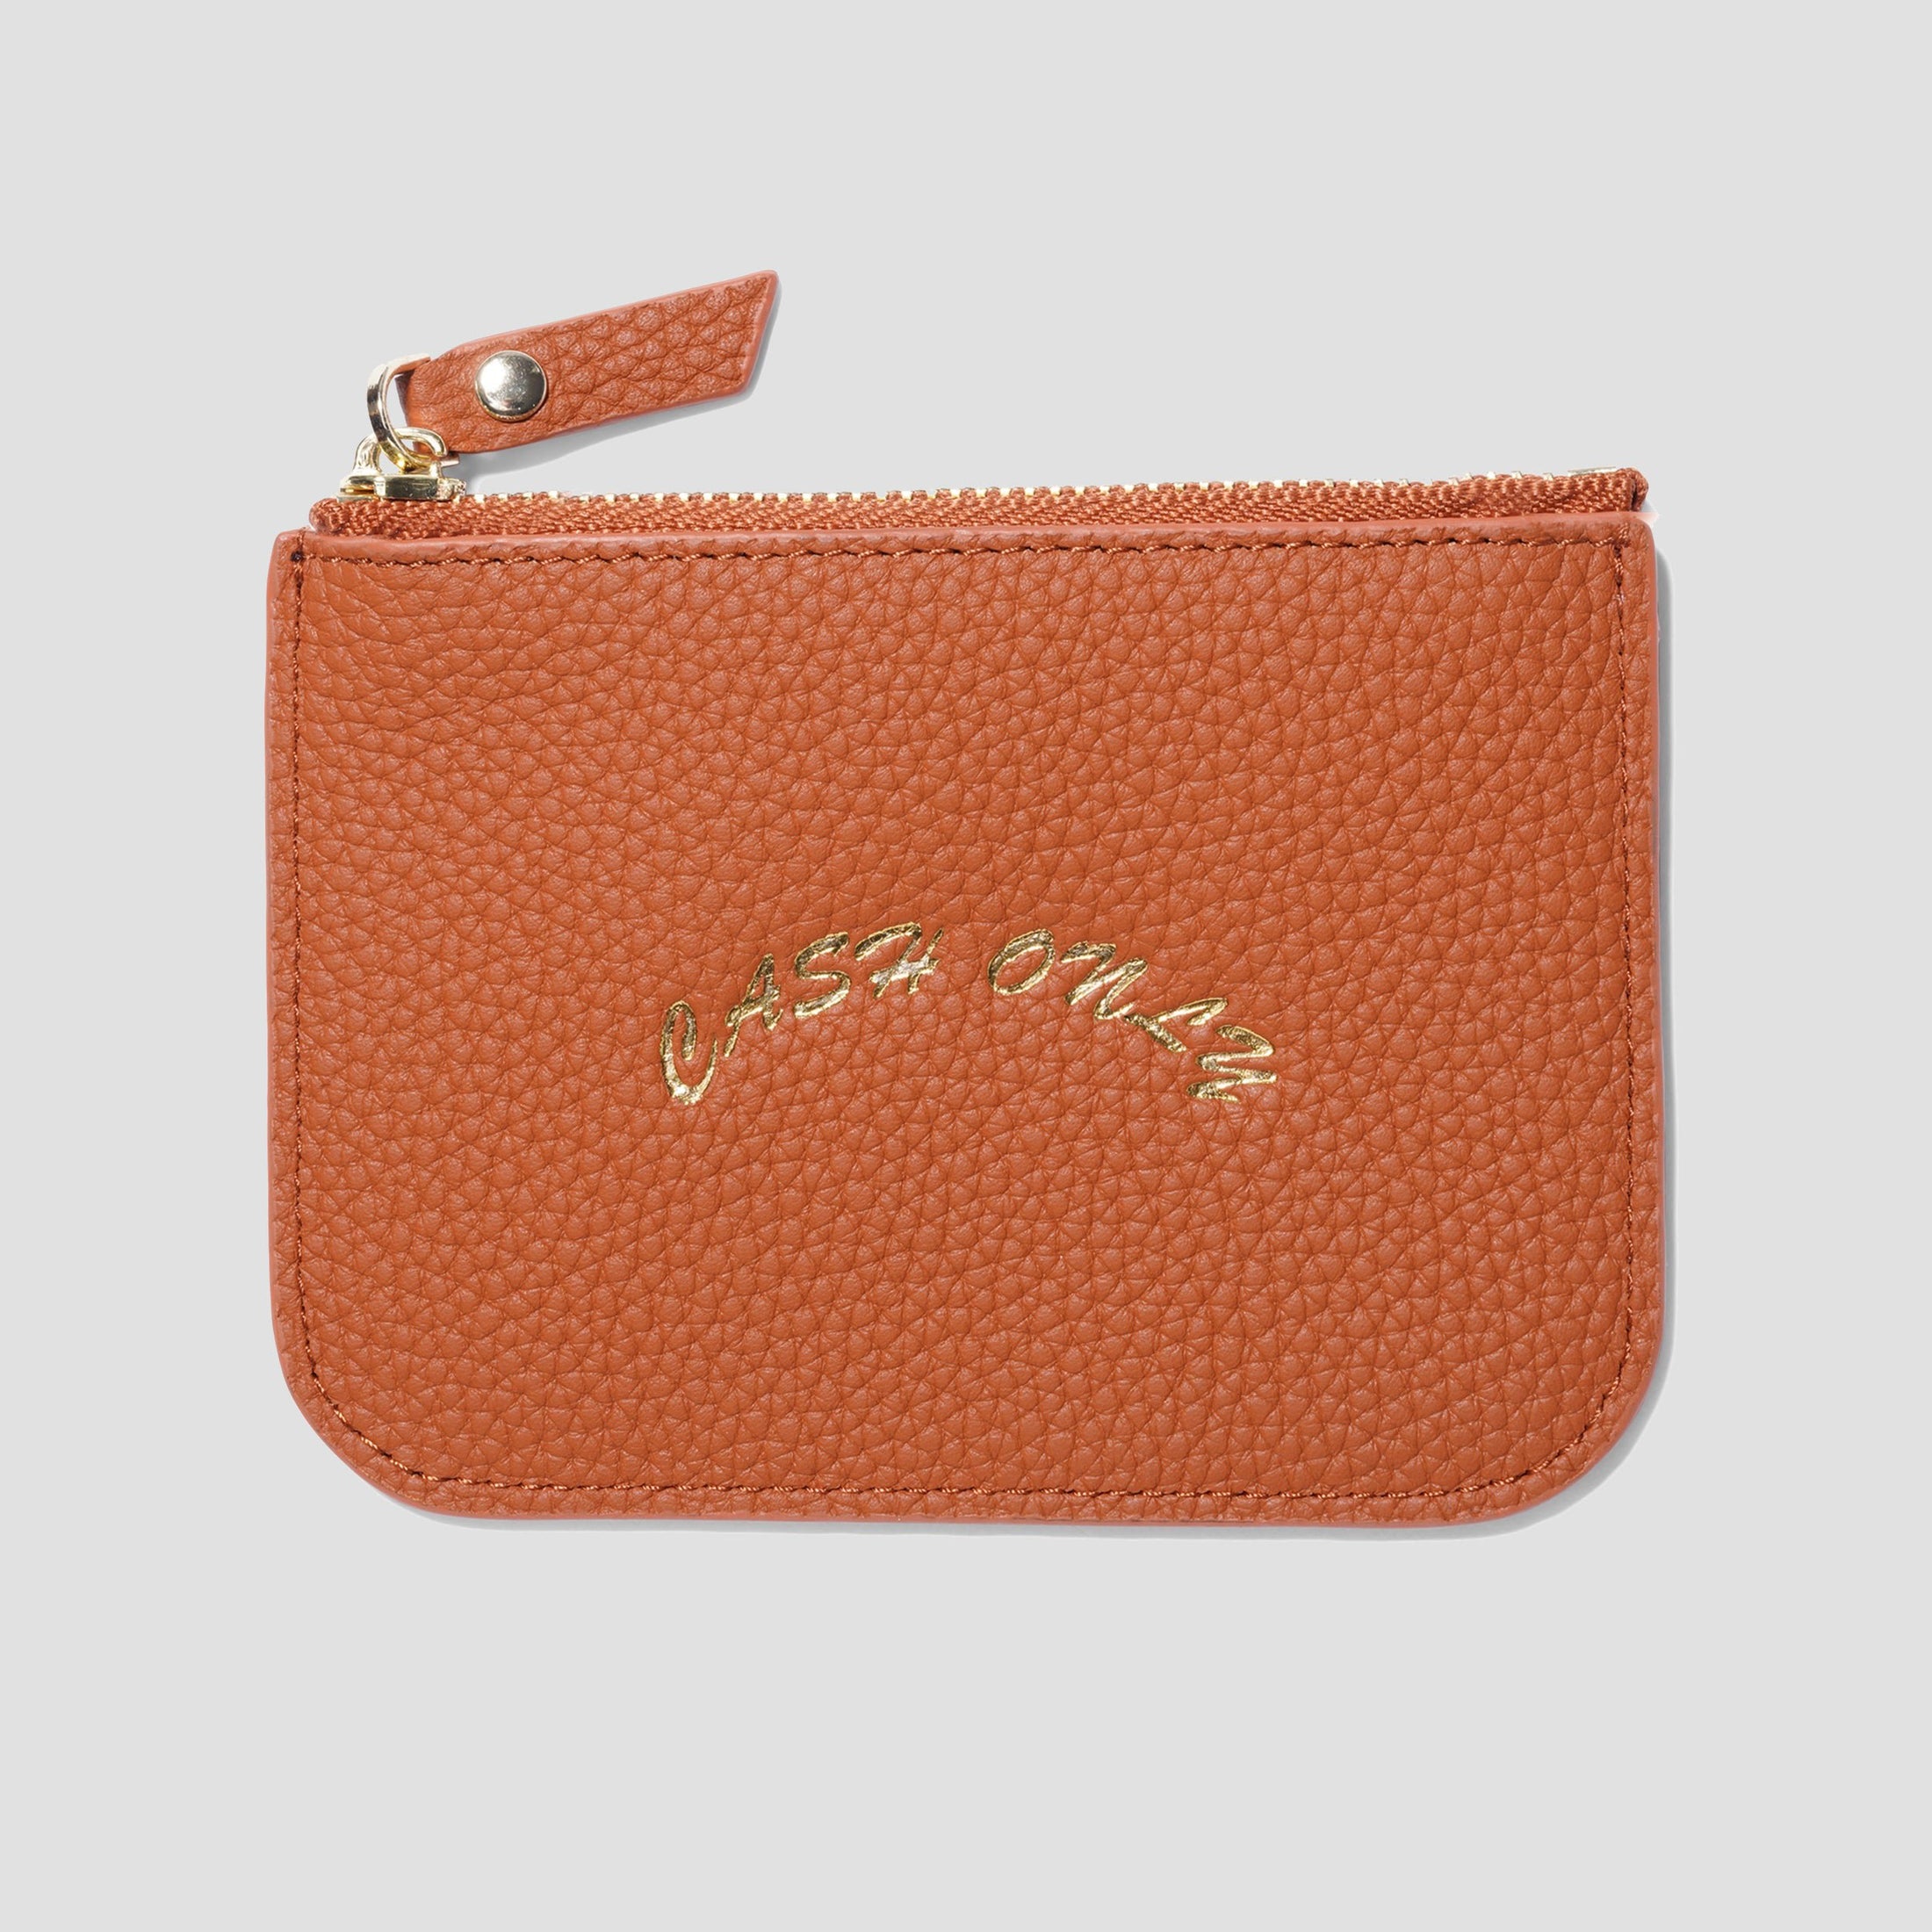 Cash Only Leather Zip Wallet Tan